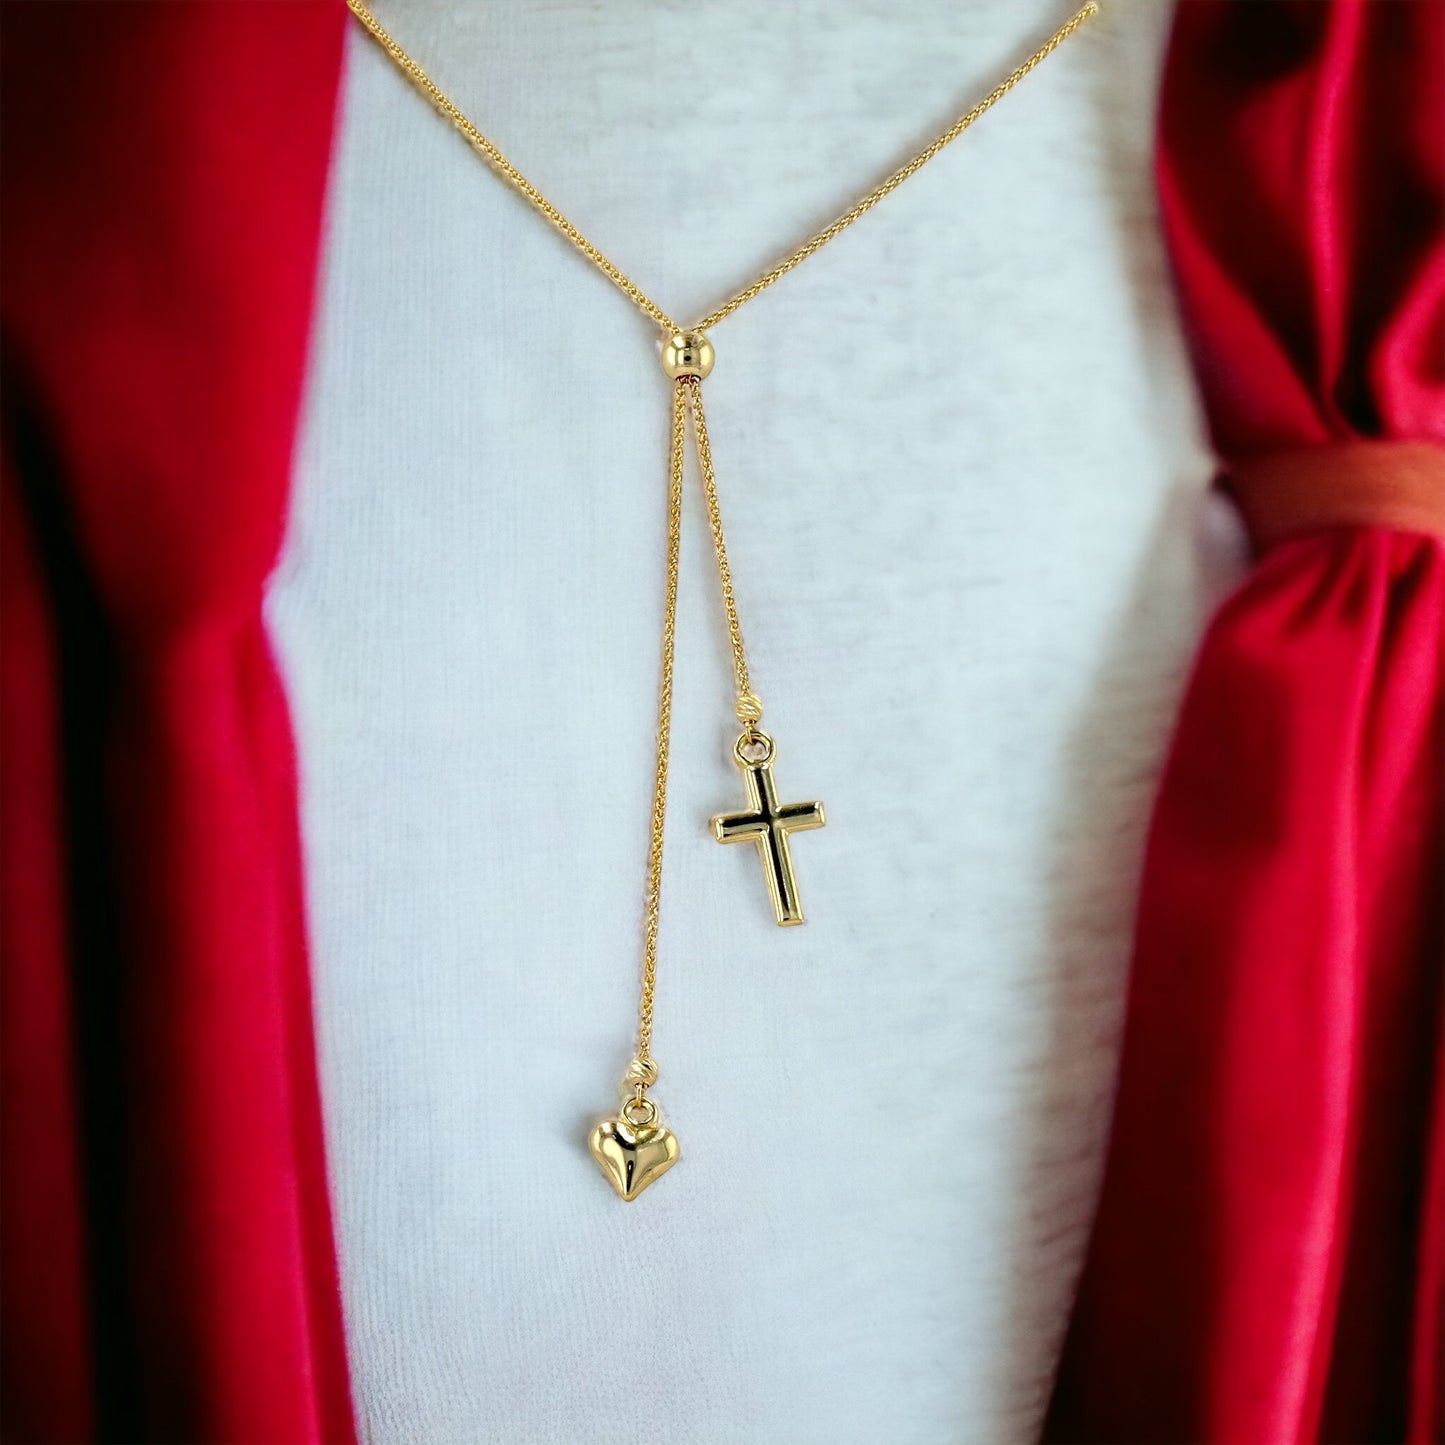 Gold 10k adjustable charm necklace cross and heart